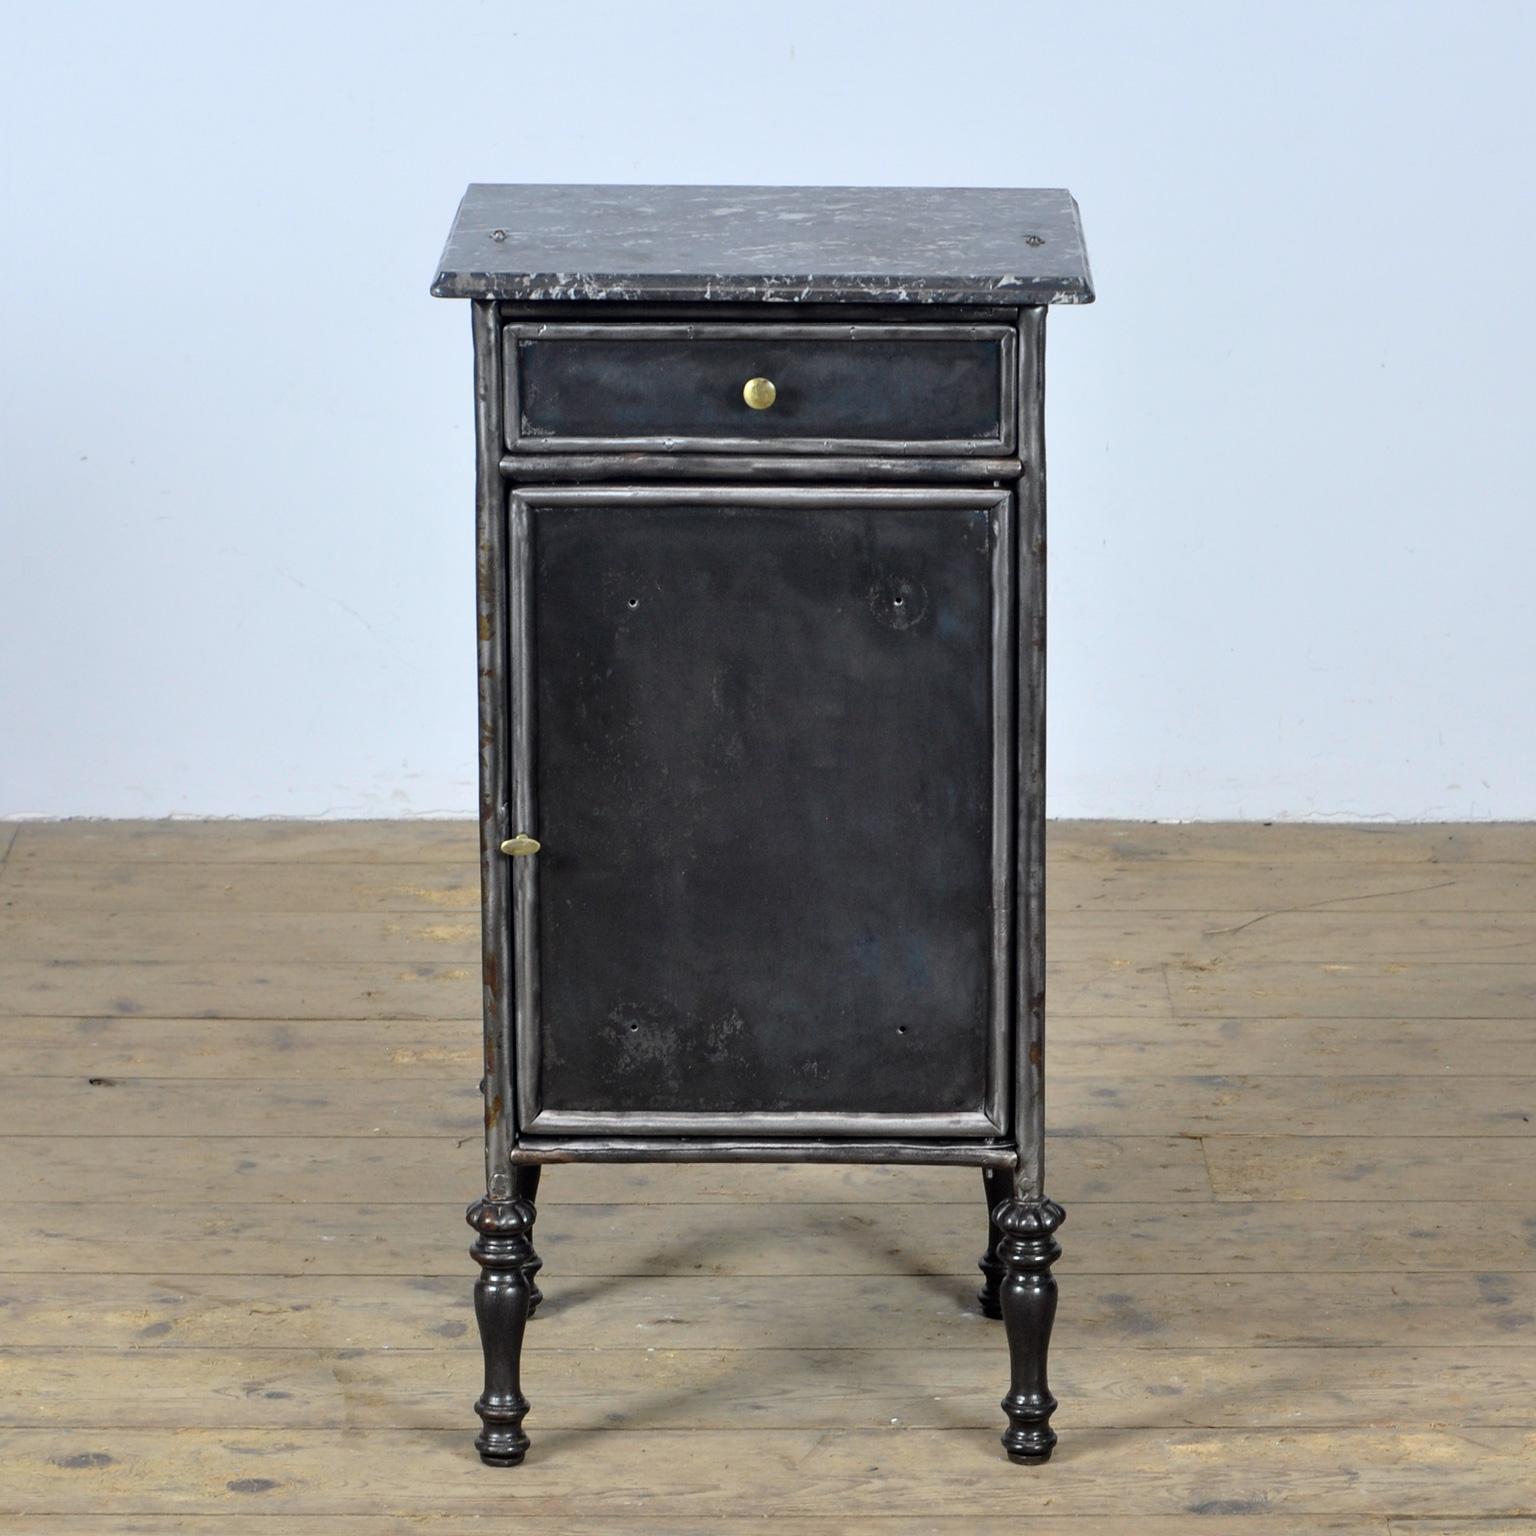 Bedside table made of iron with a marble top. The cabinet has brass knobs on the drawer and door. Beautiful cast iron legs. Stripped to the metal and polished. circa 1900.